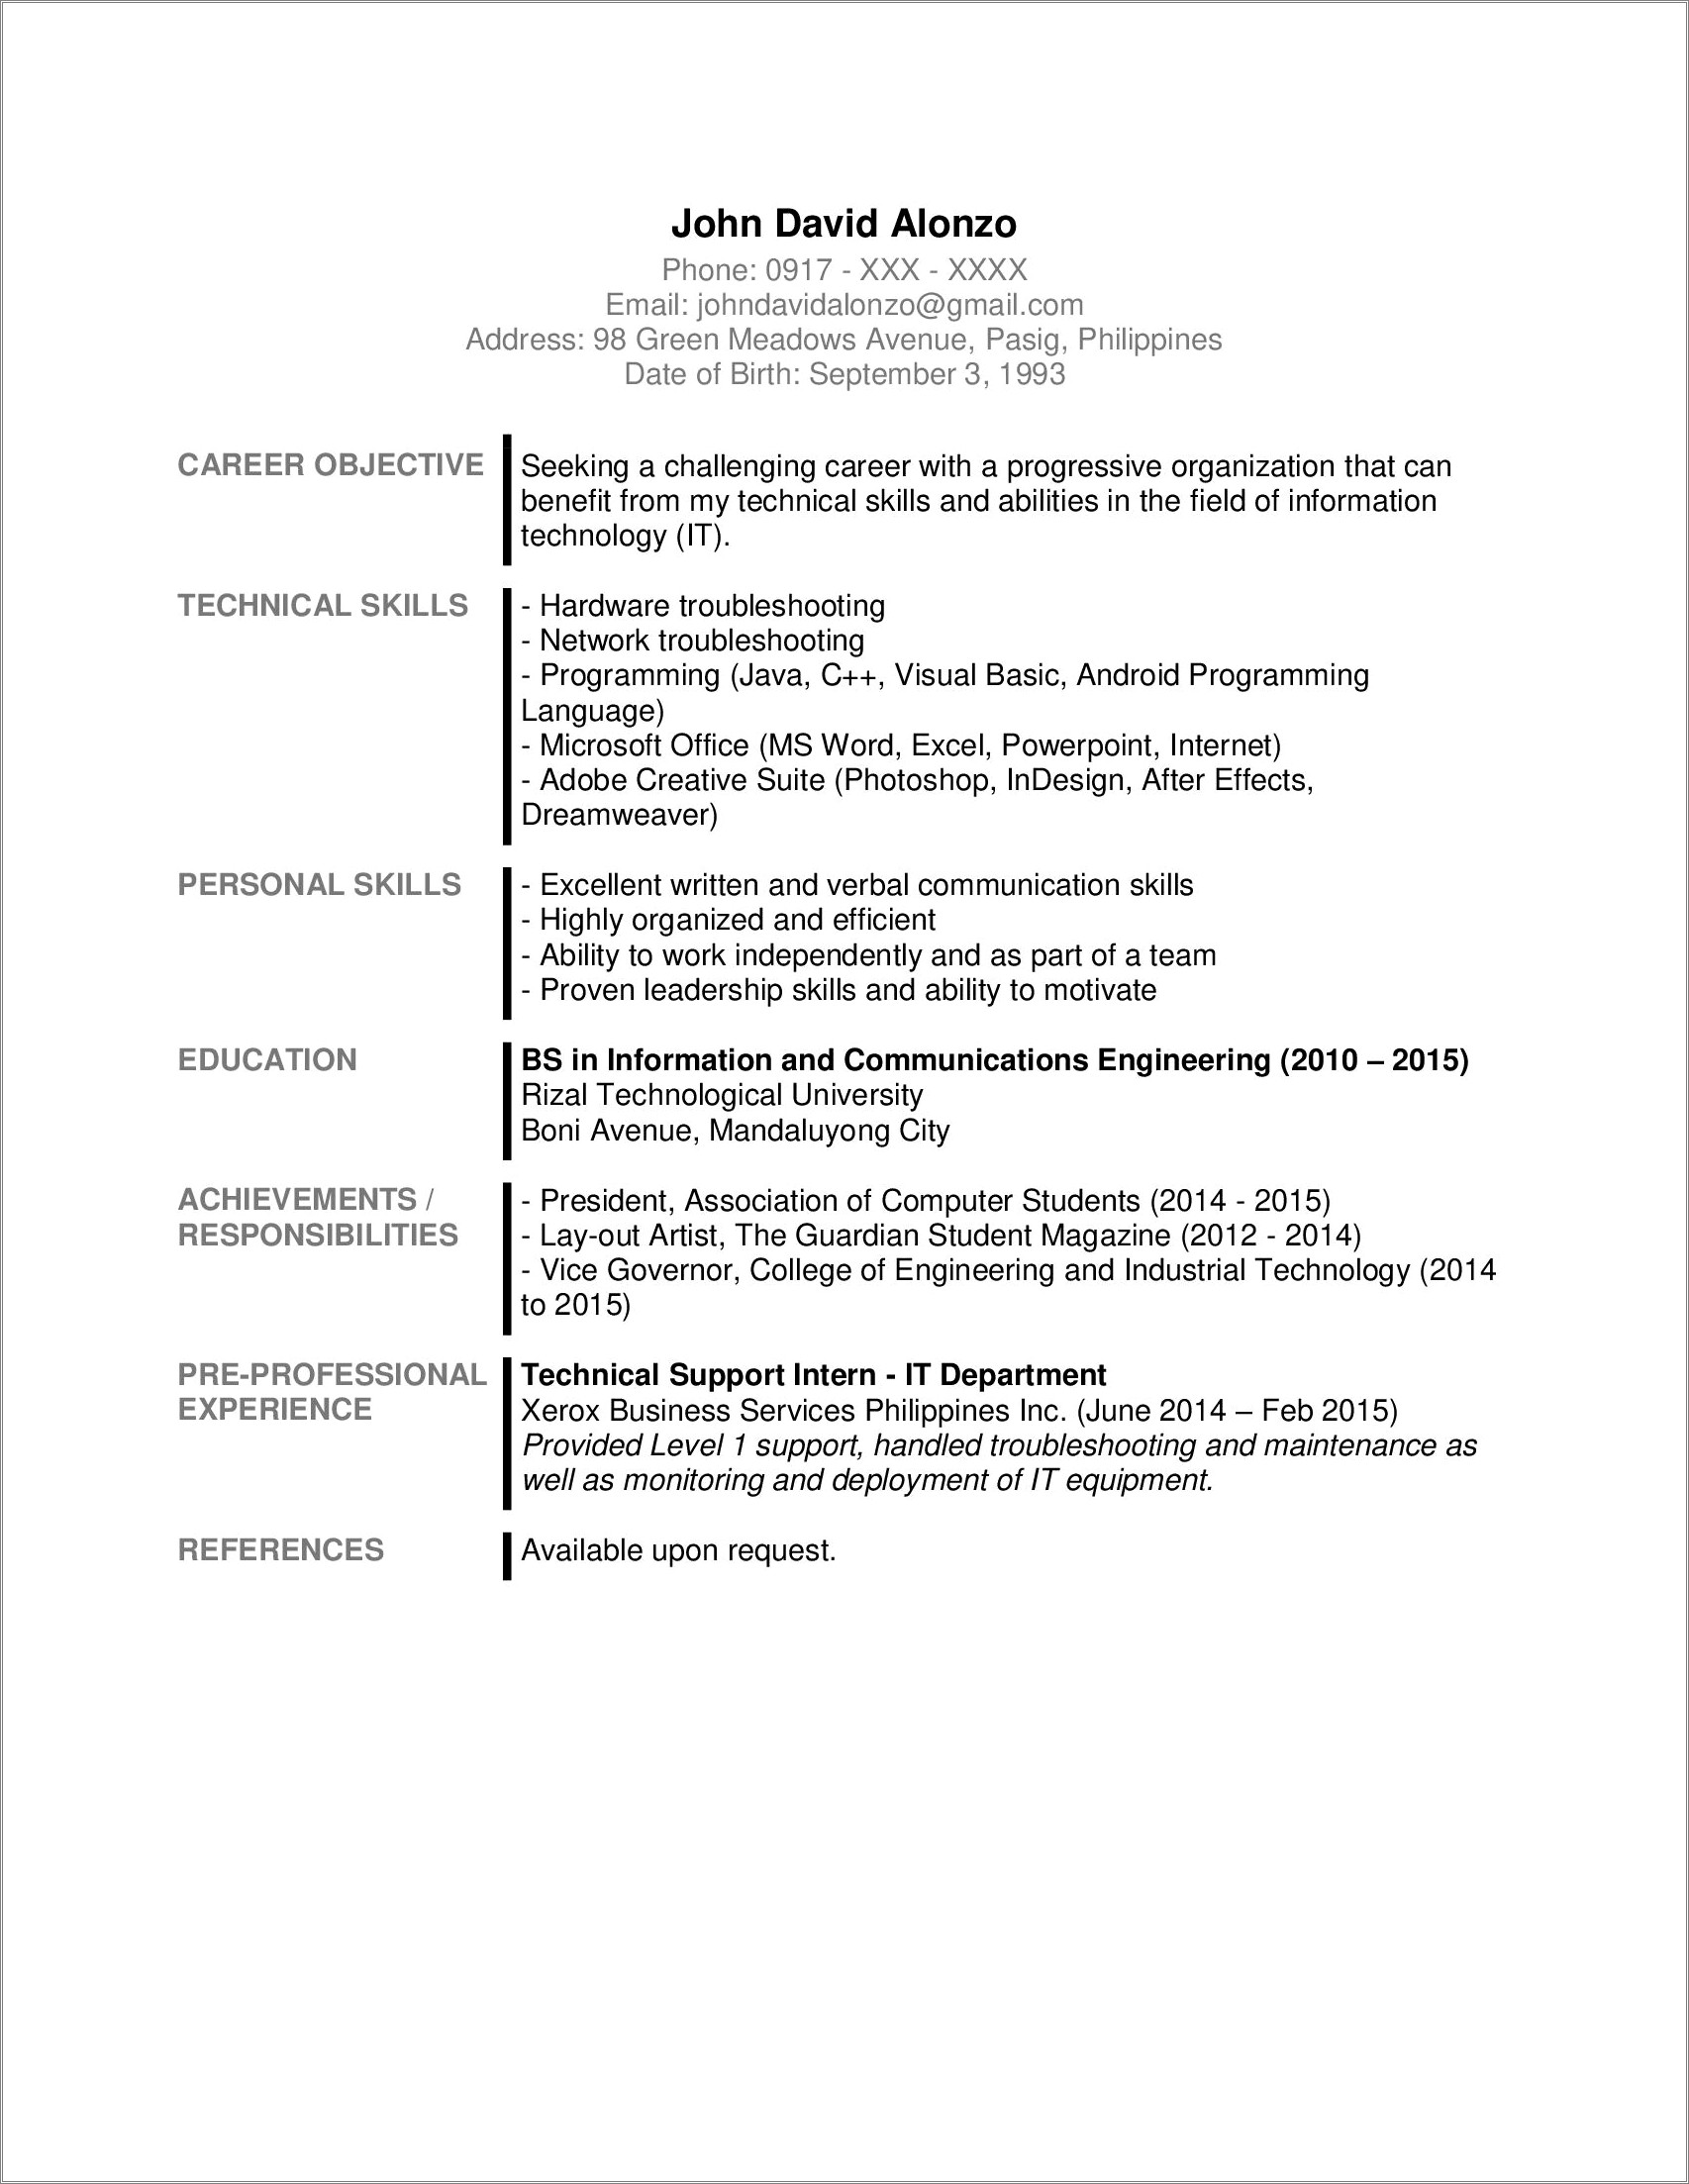 Resume Composition Writing Help Free Online